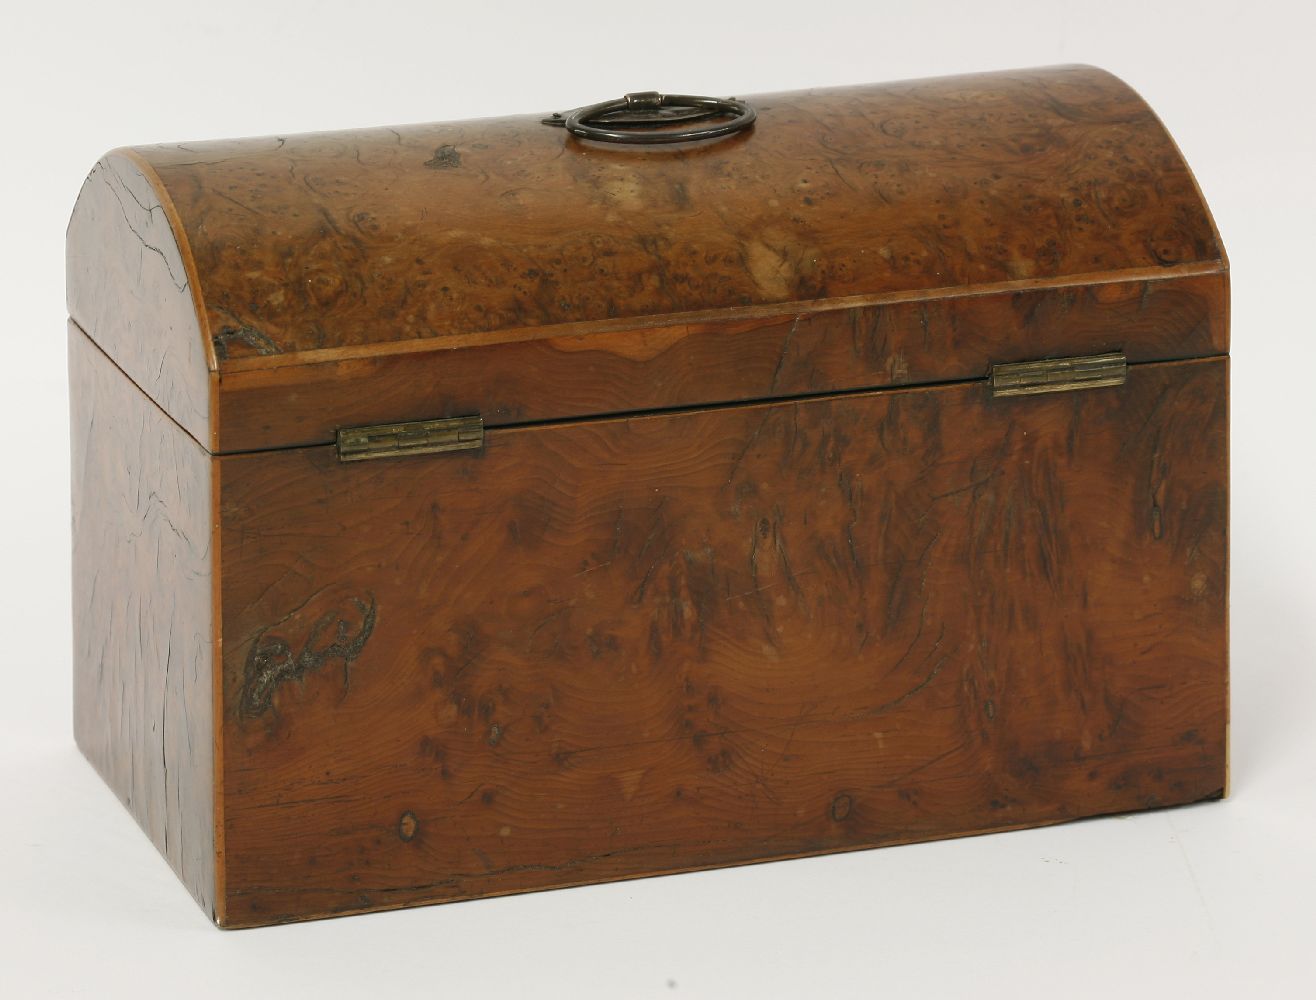 An unusual burr yew wood domed top tea caddy,early 19th century, the interior with a single lidded - Image 2 of 3